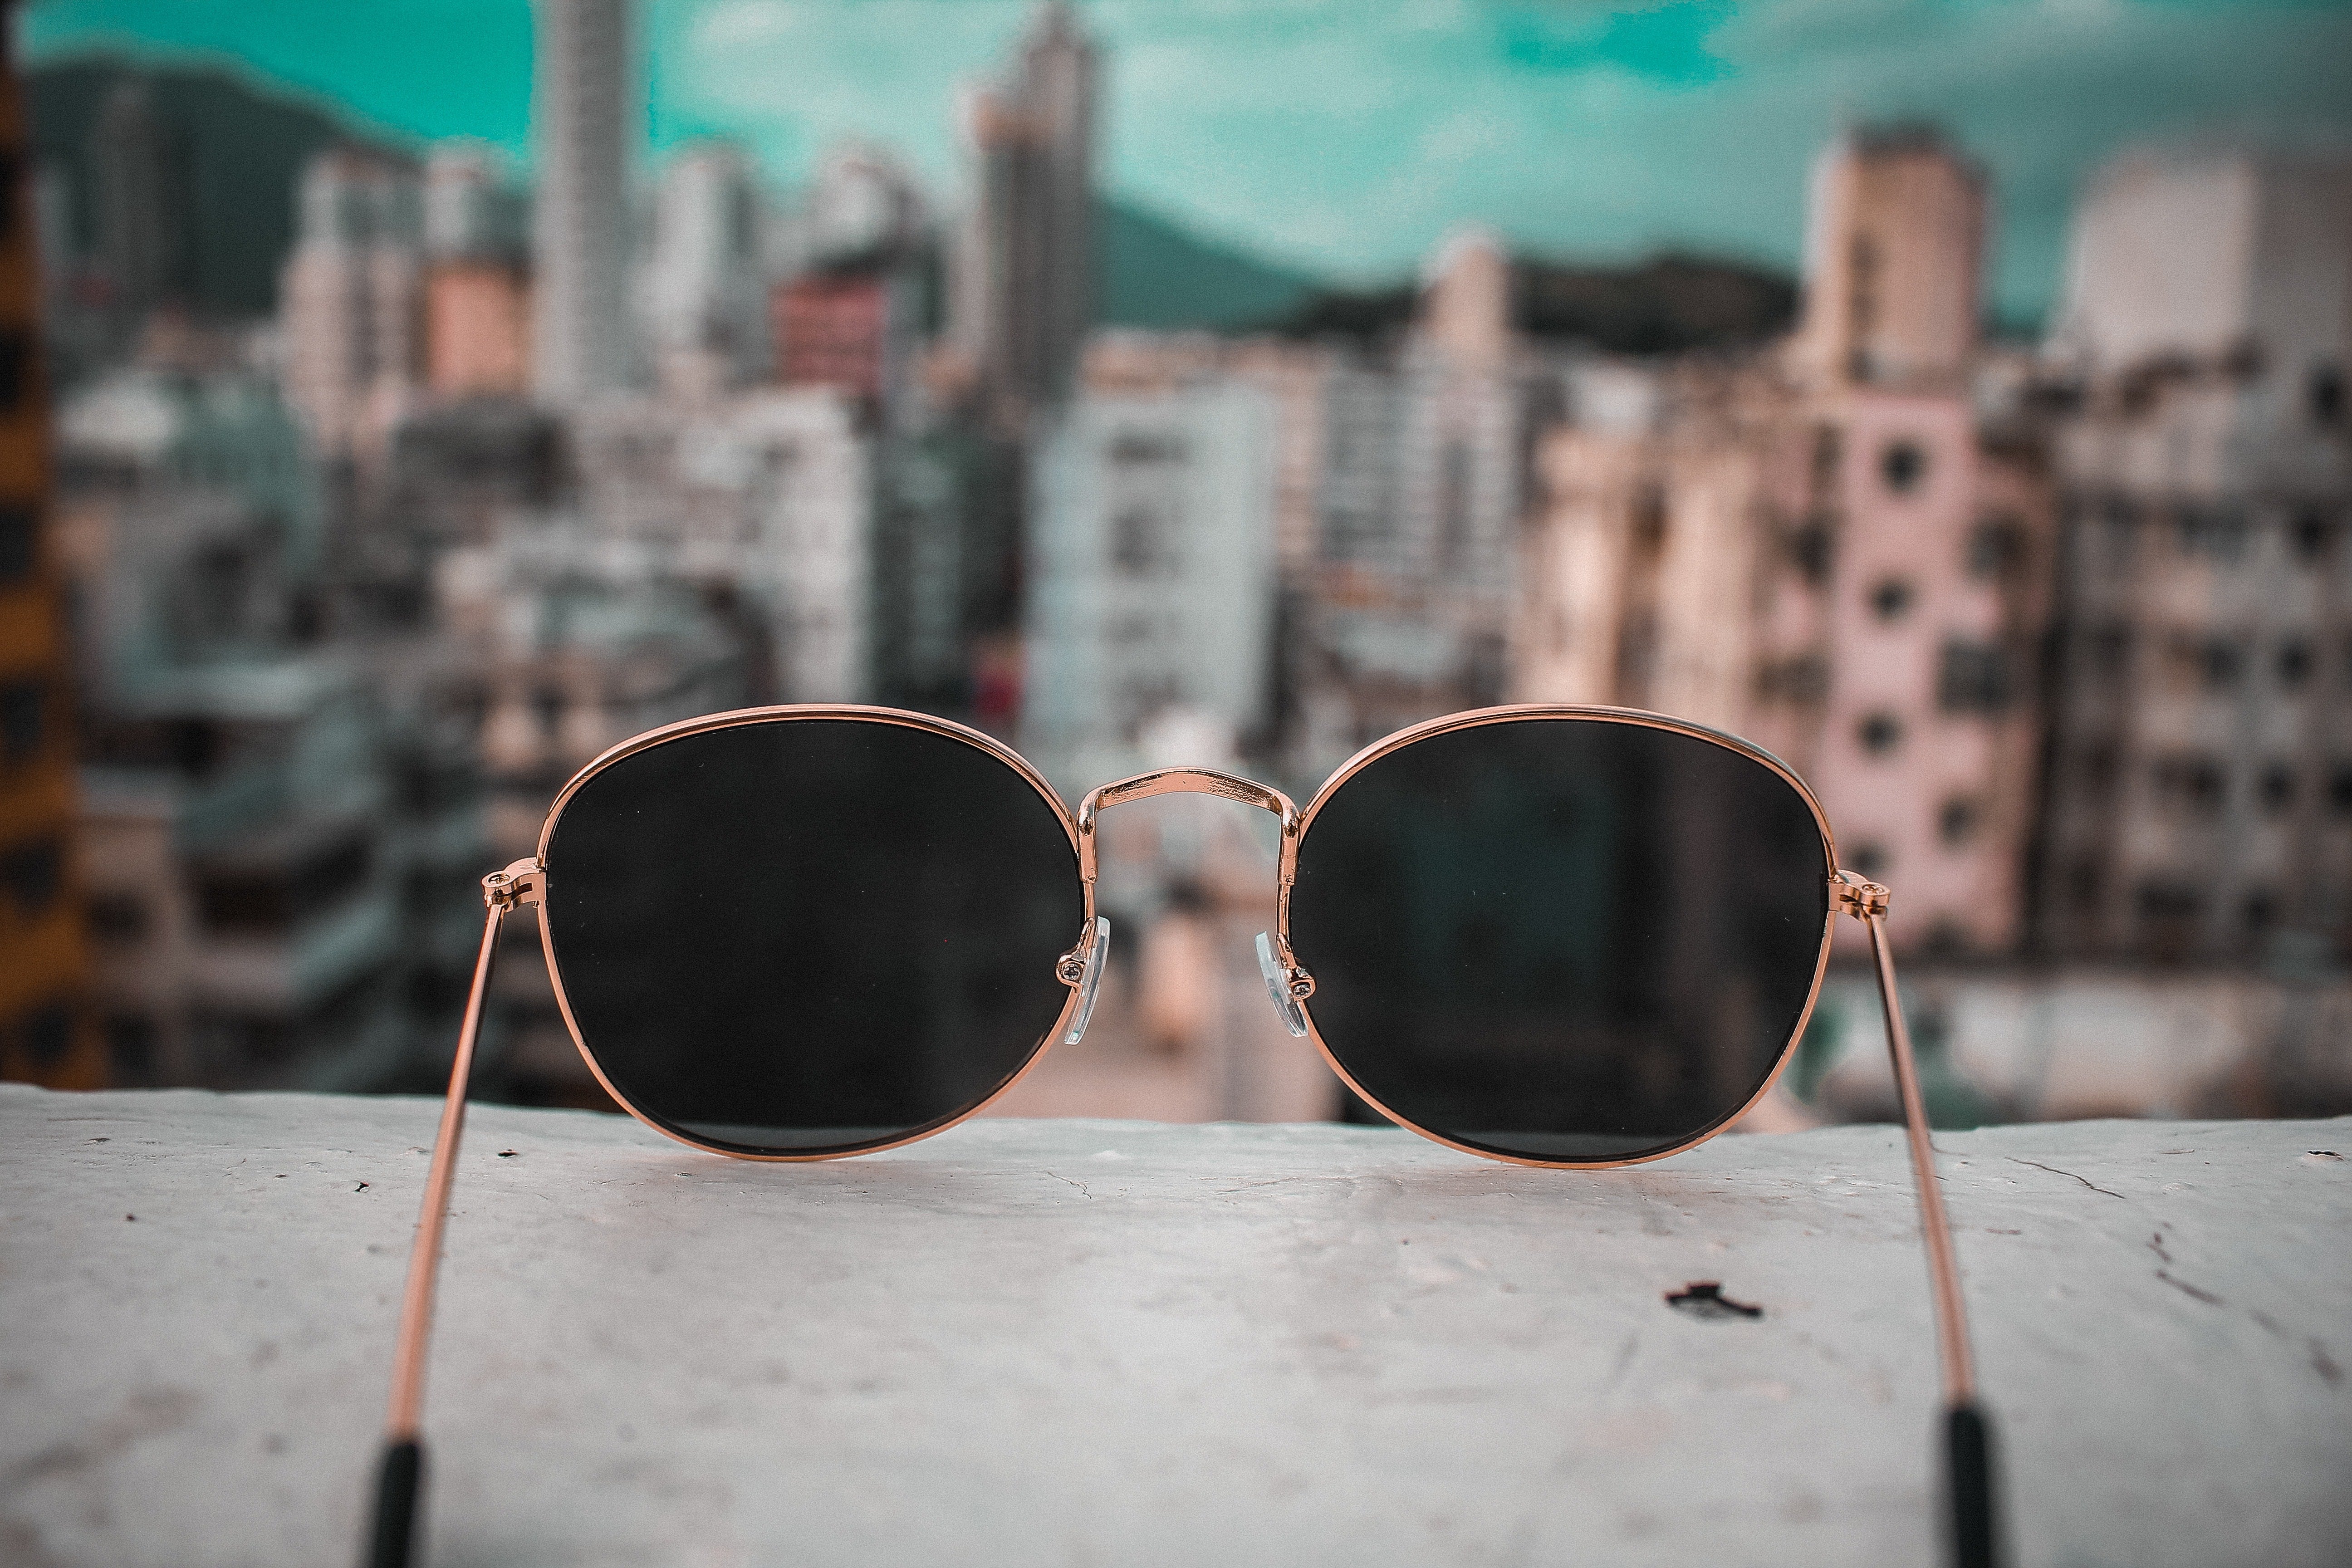 The Feature Must Haves When You're Shopping for New Sunglasses